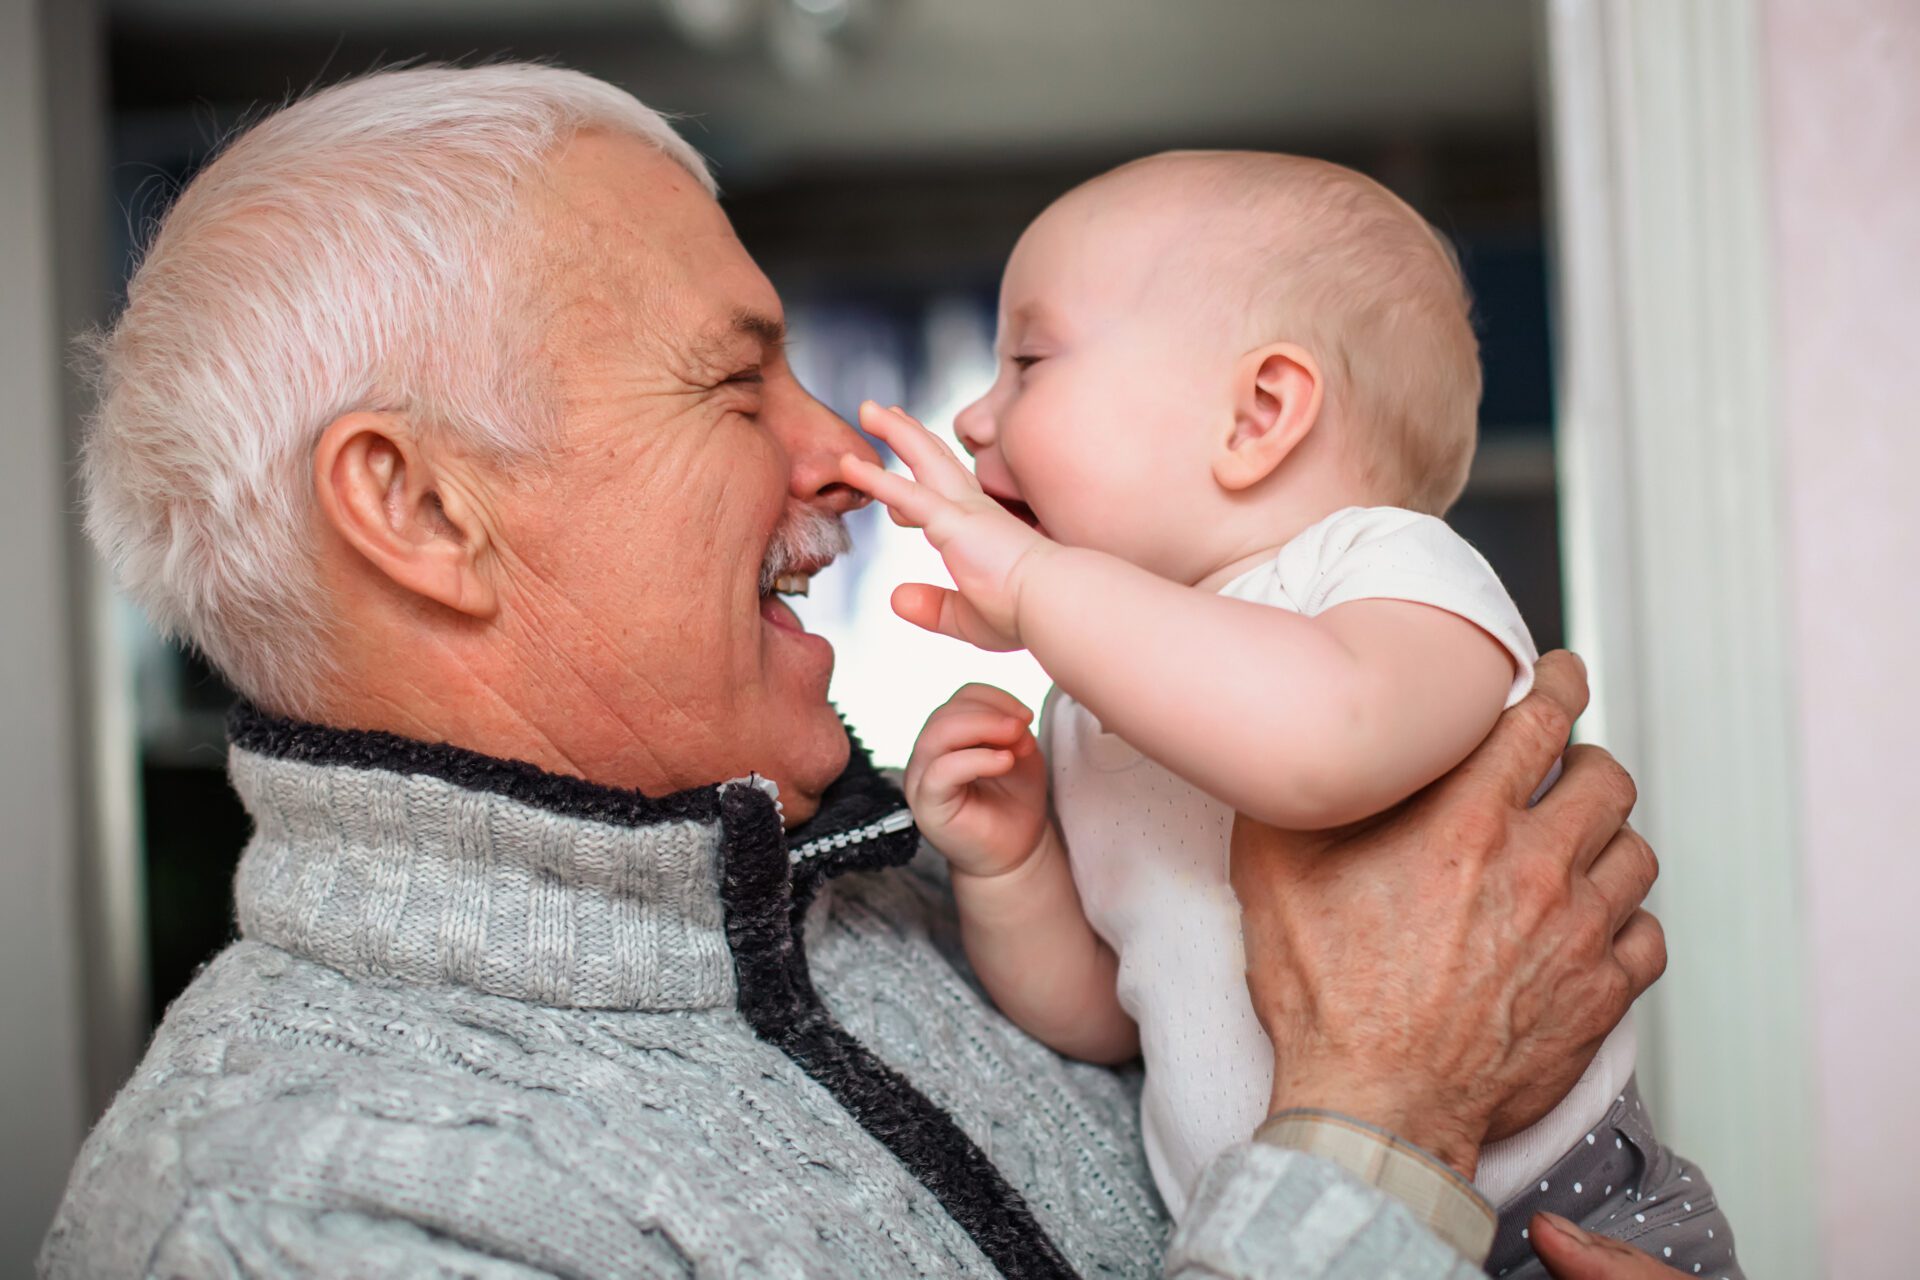 A newborn baby touches the old grandfather by the nose